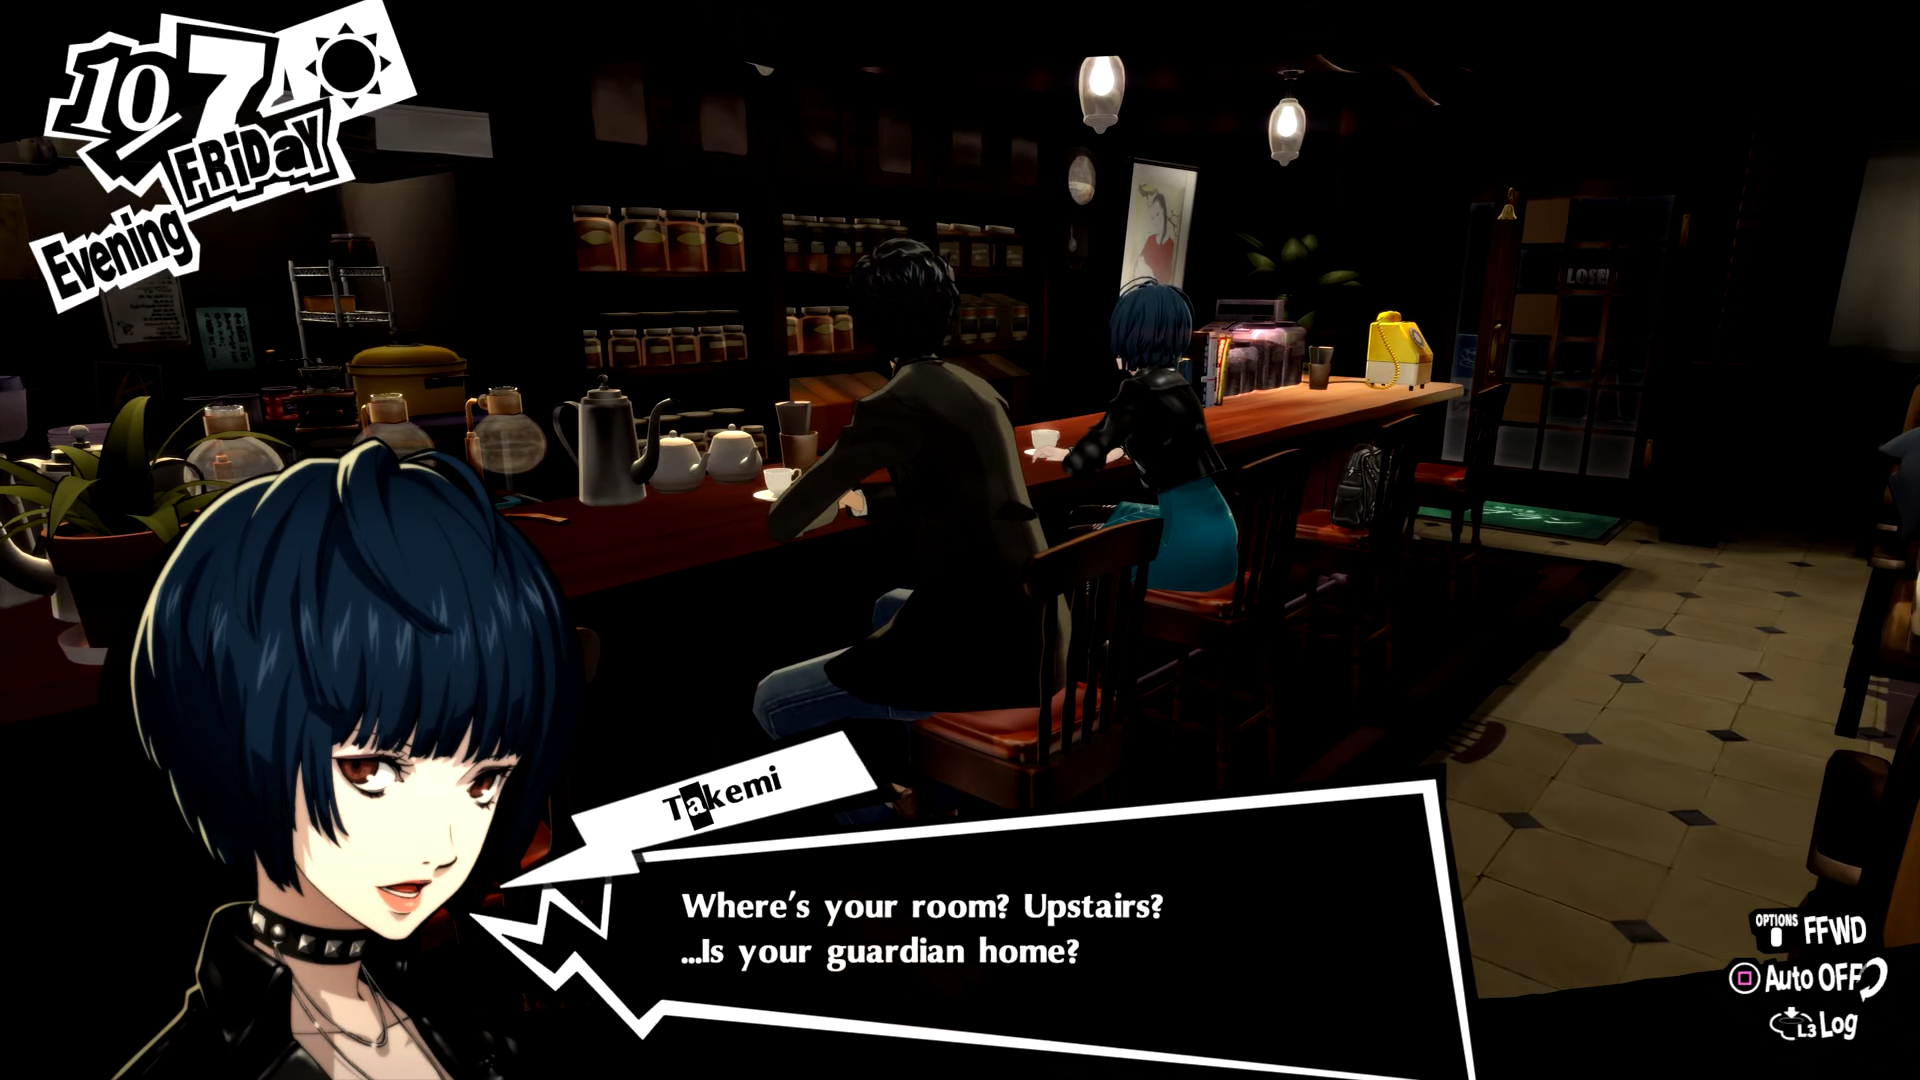 Tae Takemi asks Persona 5's Protagonist if his guardian is home with a suggestive look.